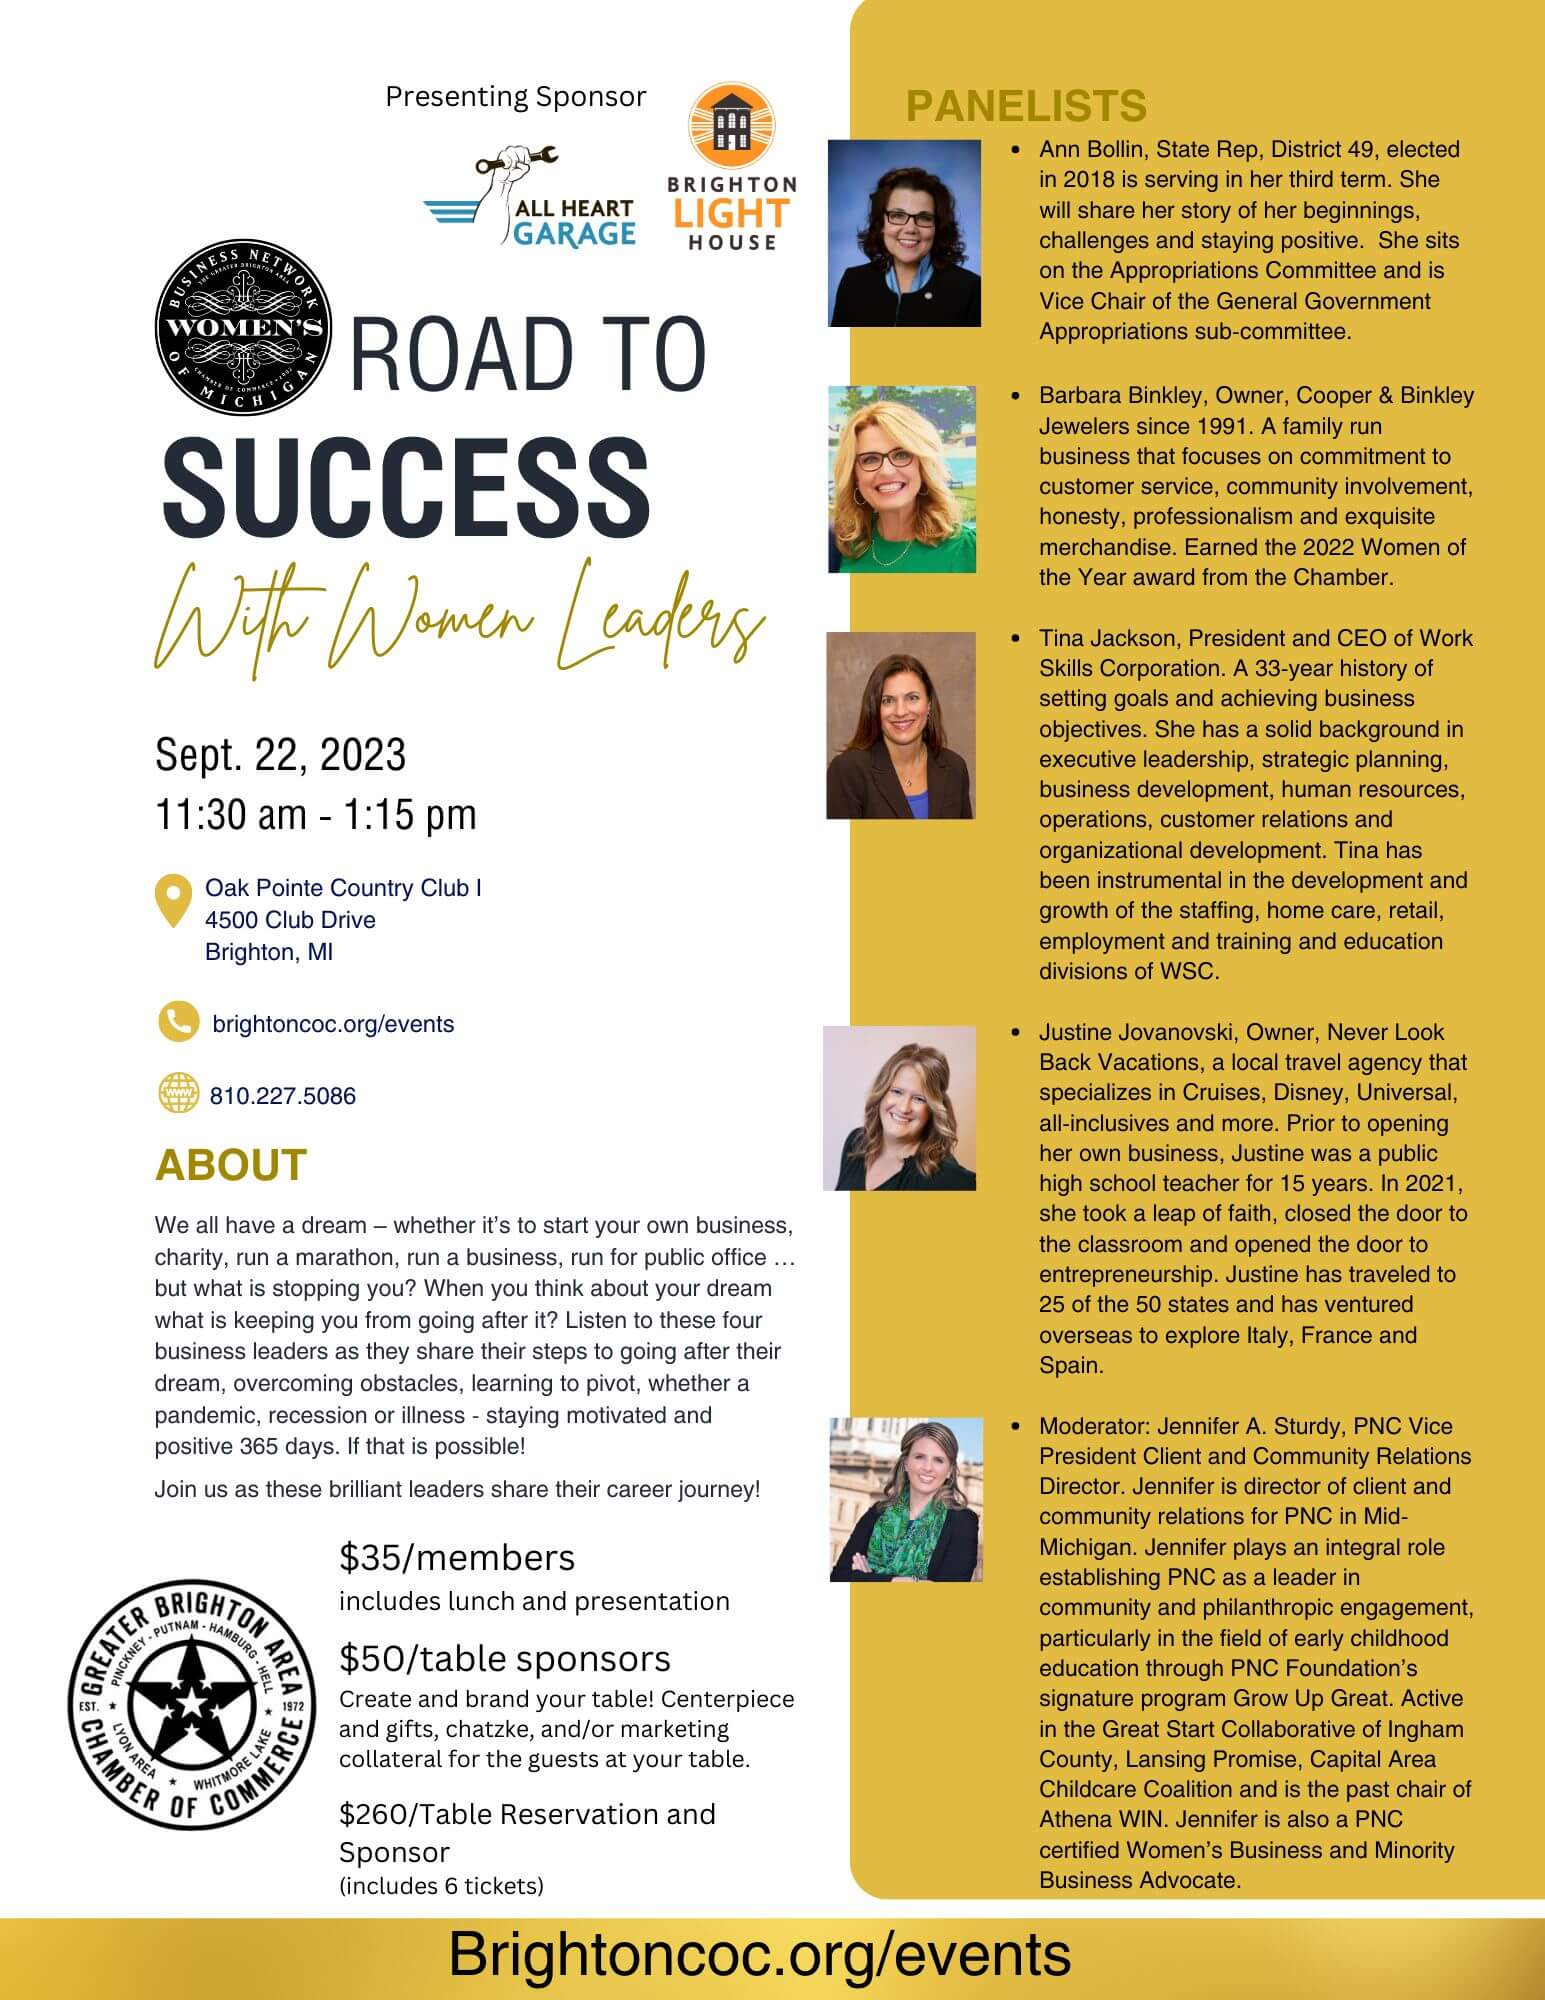 Women's Business Network of Michigan Road to Success luncheon